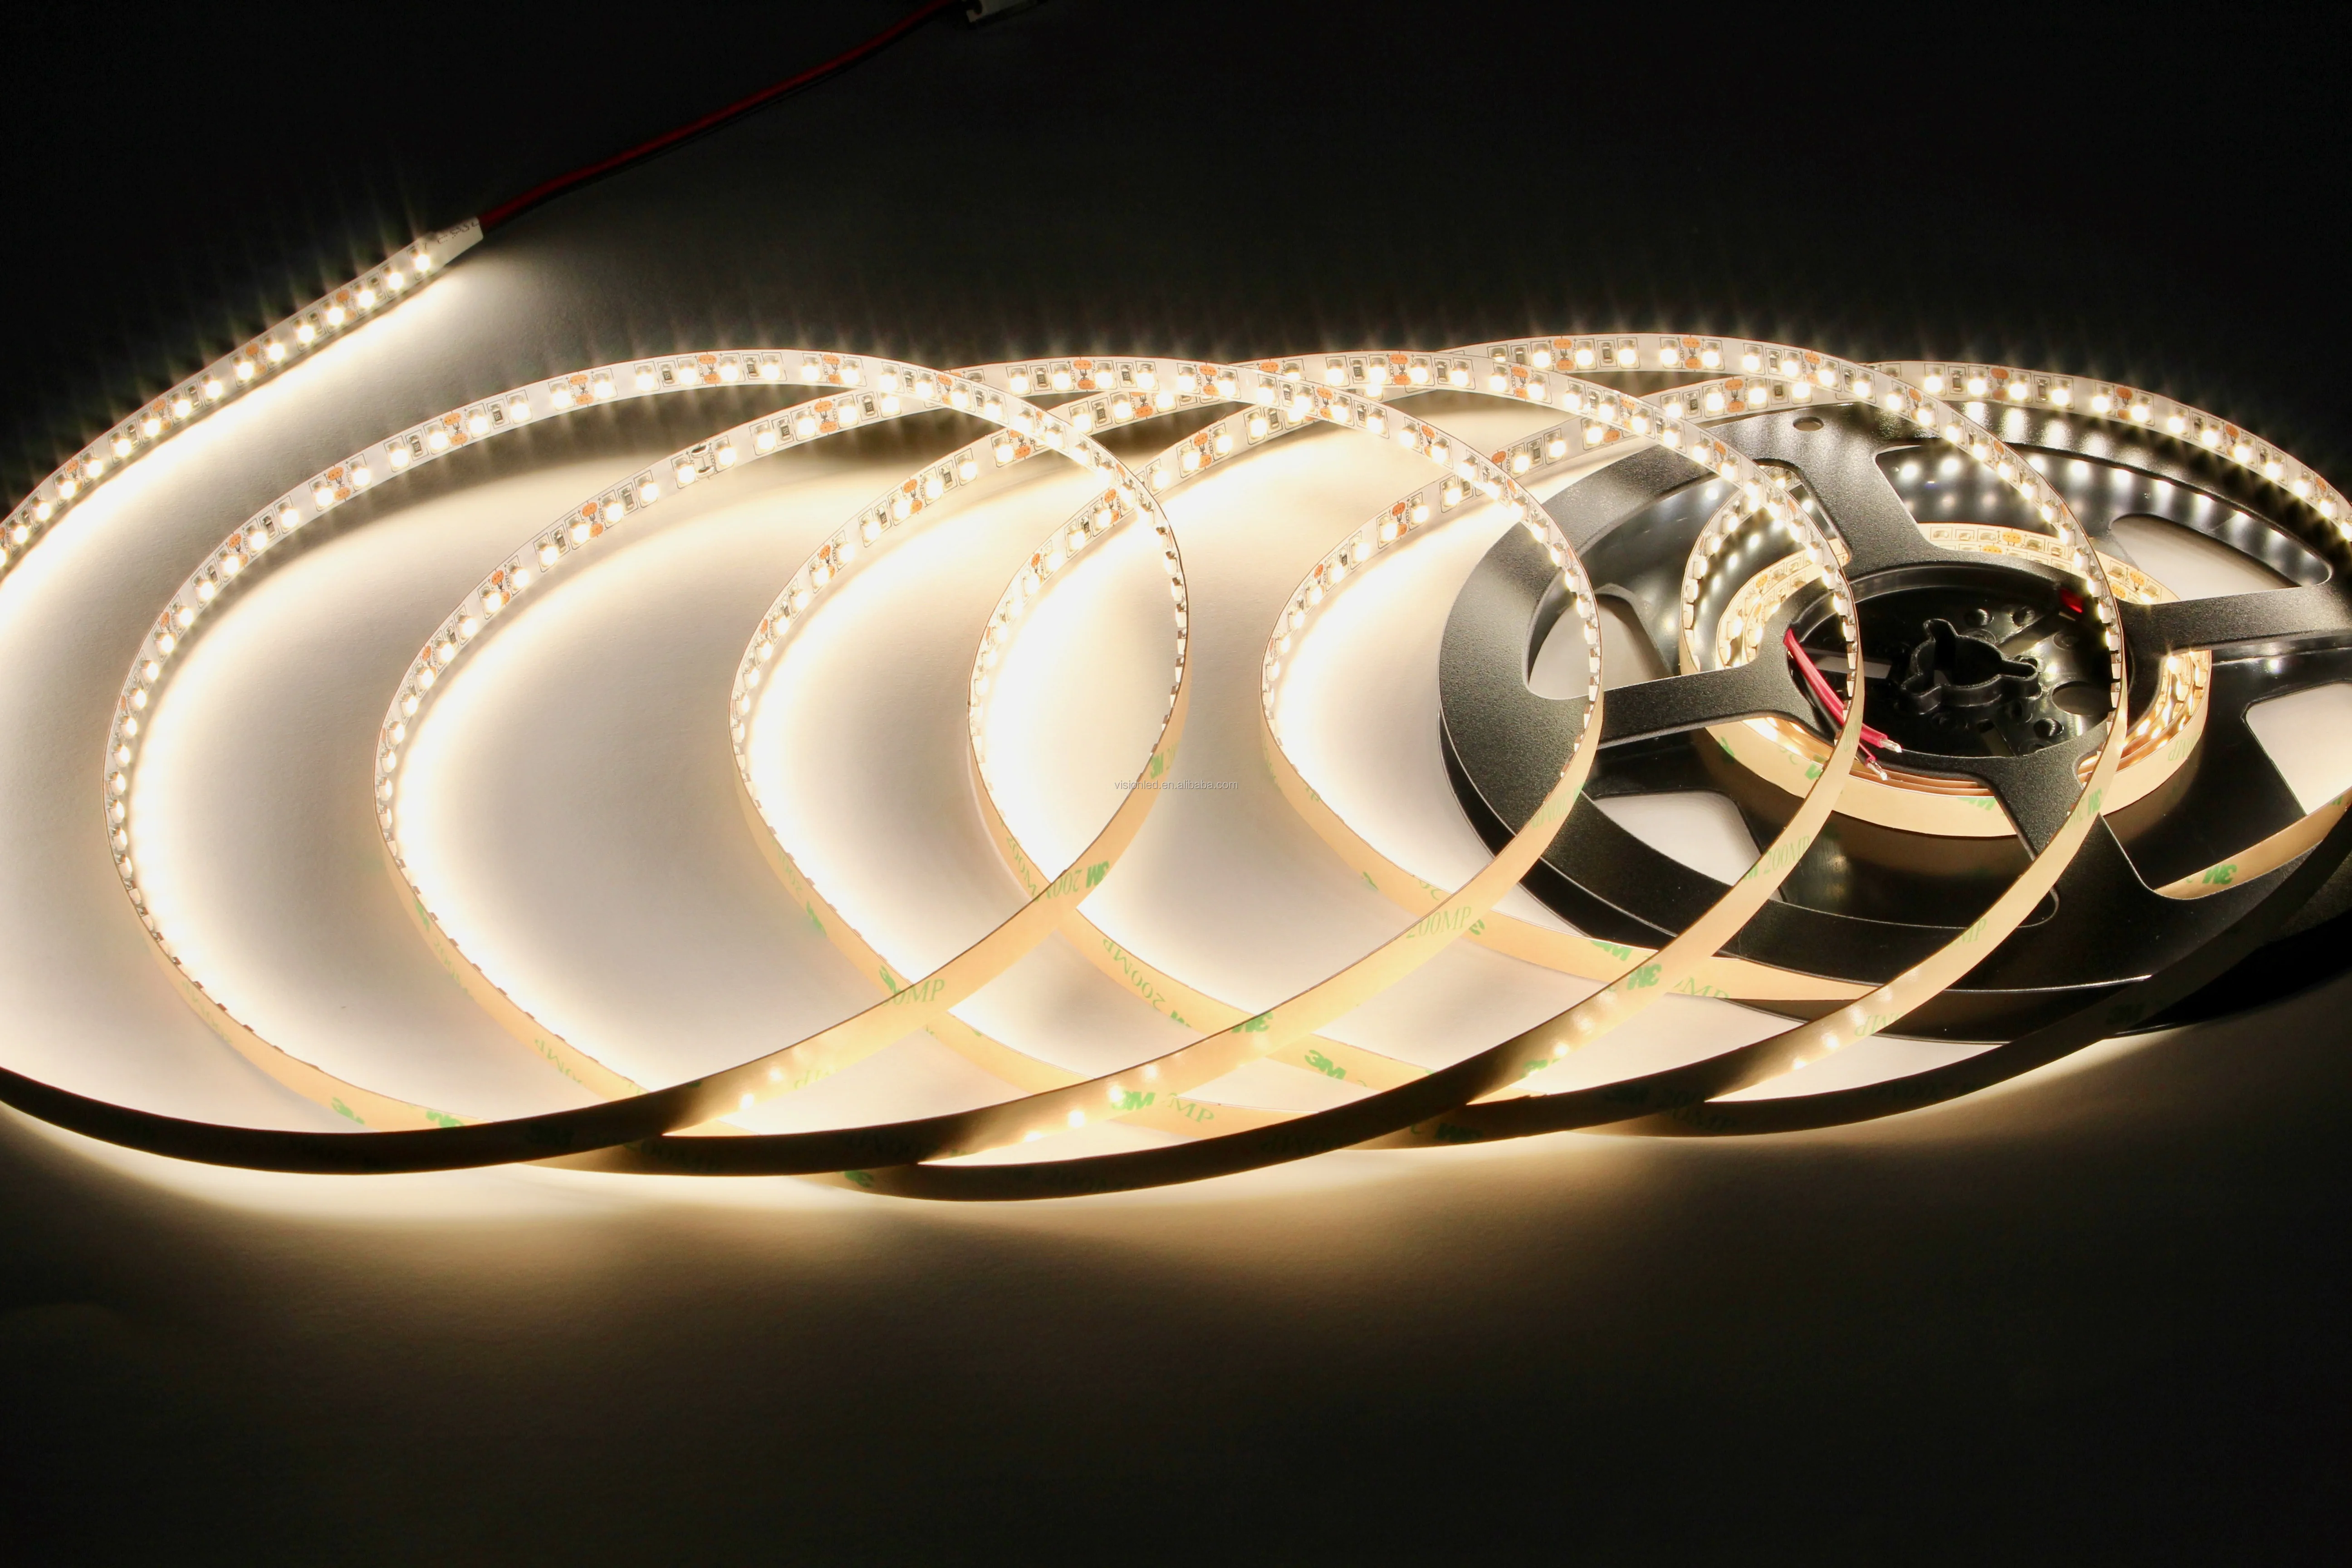 high brightness 3528 smd led strip 300 led ;3528 SMD;60LEDs/m,waterproof by silicon fully covered